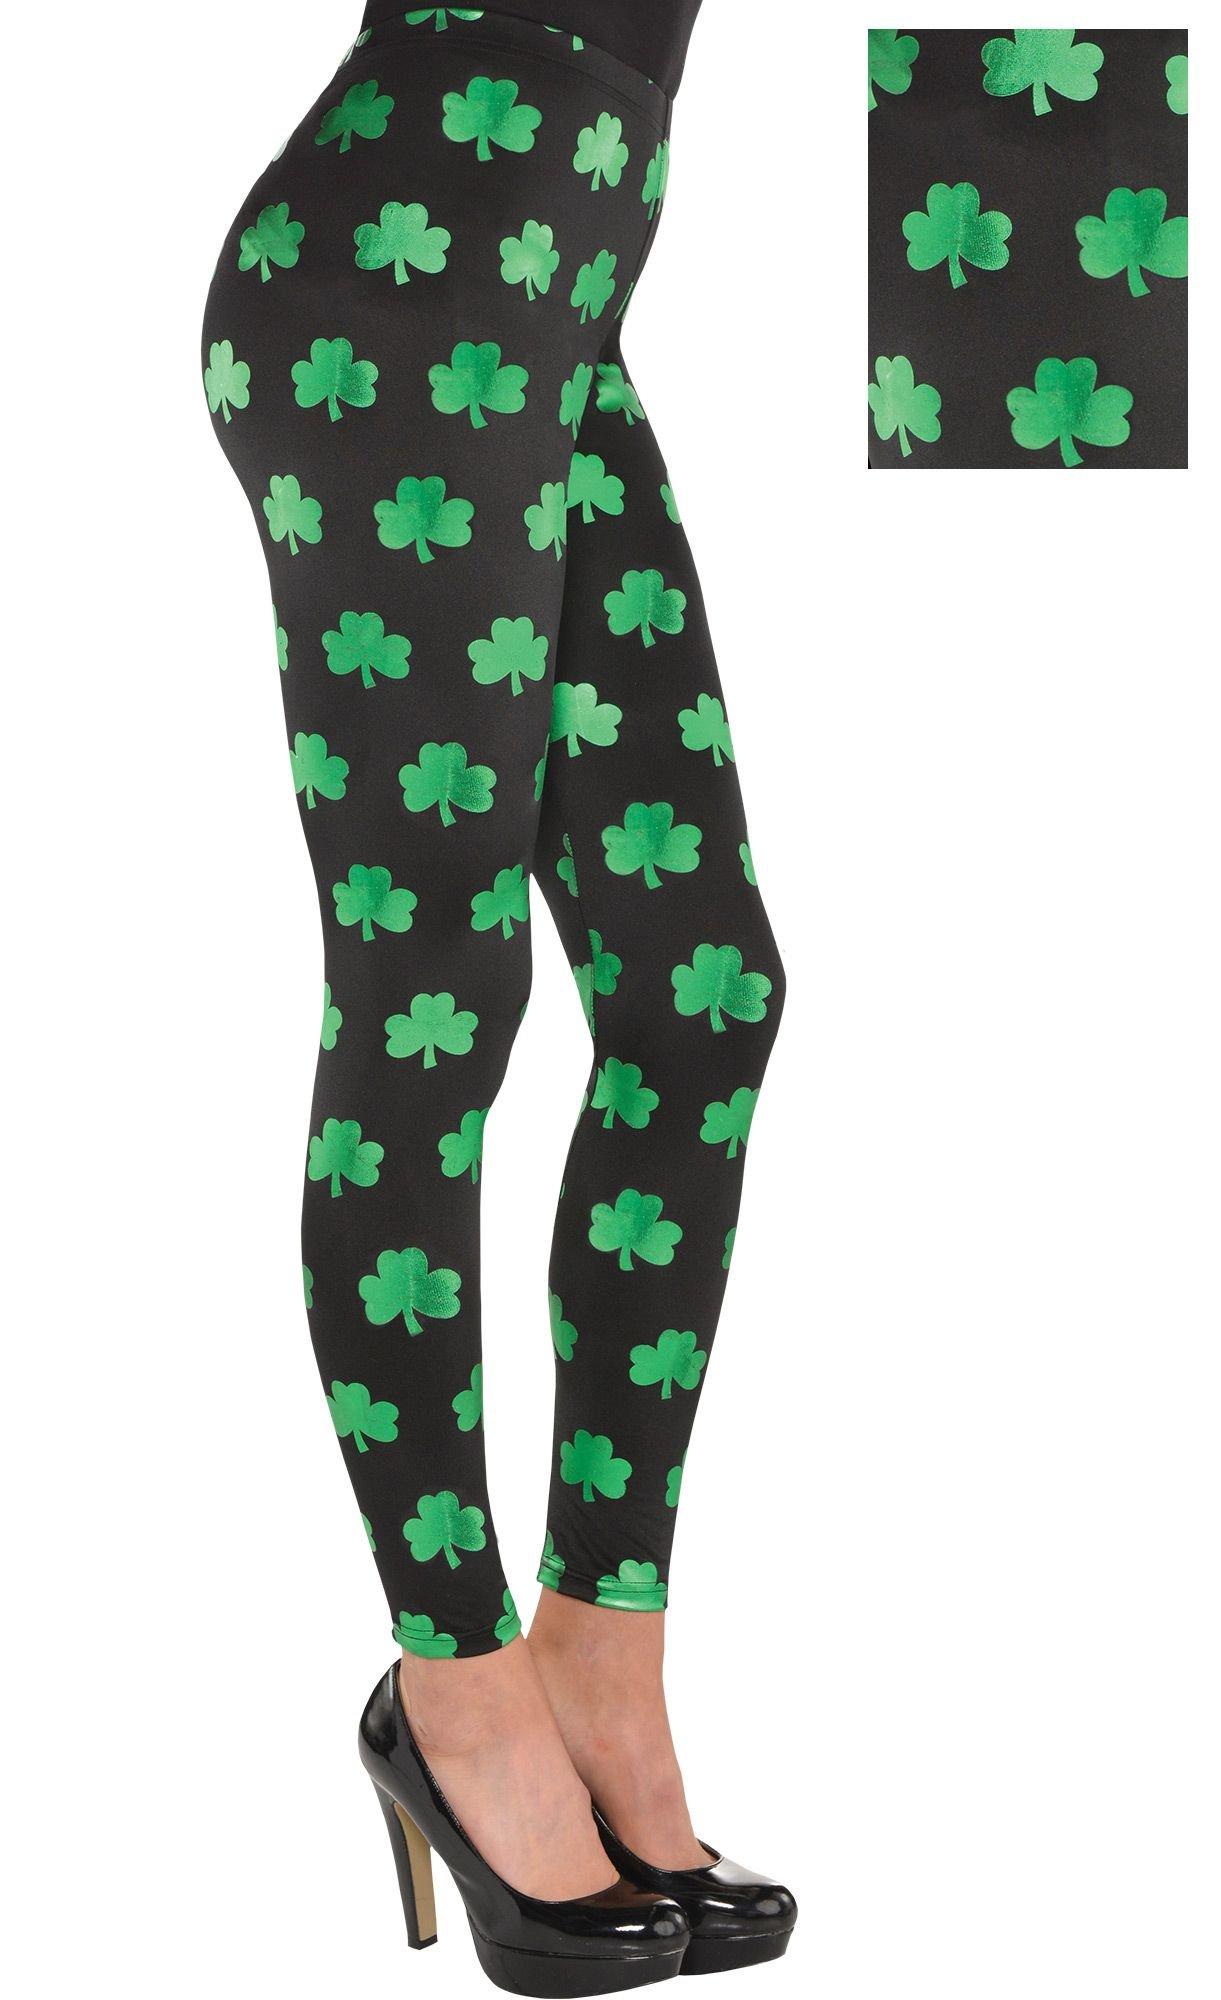 4-leaf Clover Leggings, Green Women's Teen Shamrock Lucky Horseshoe Printed  Stretch Pants / Halloween Fest Costume Party /cute Soft Tights -  Canada